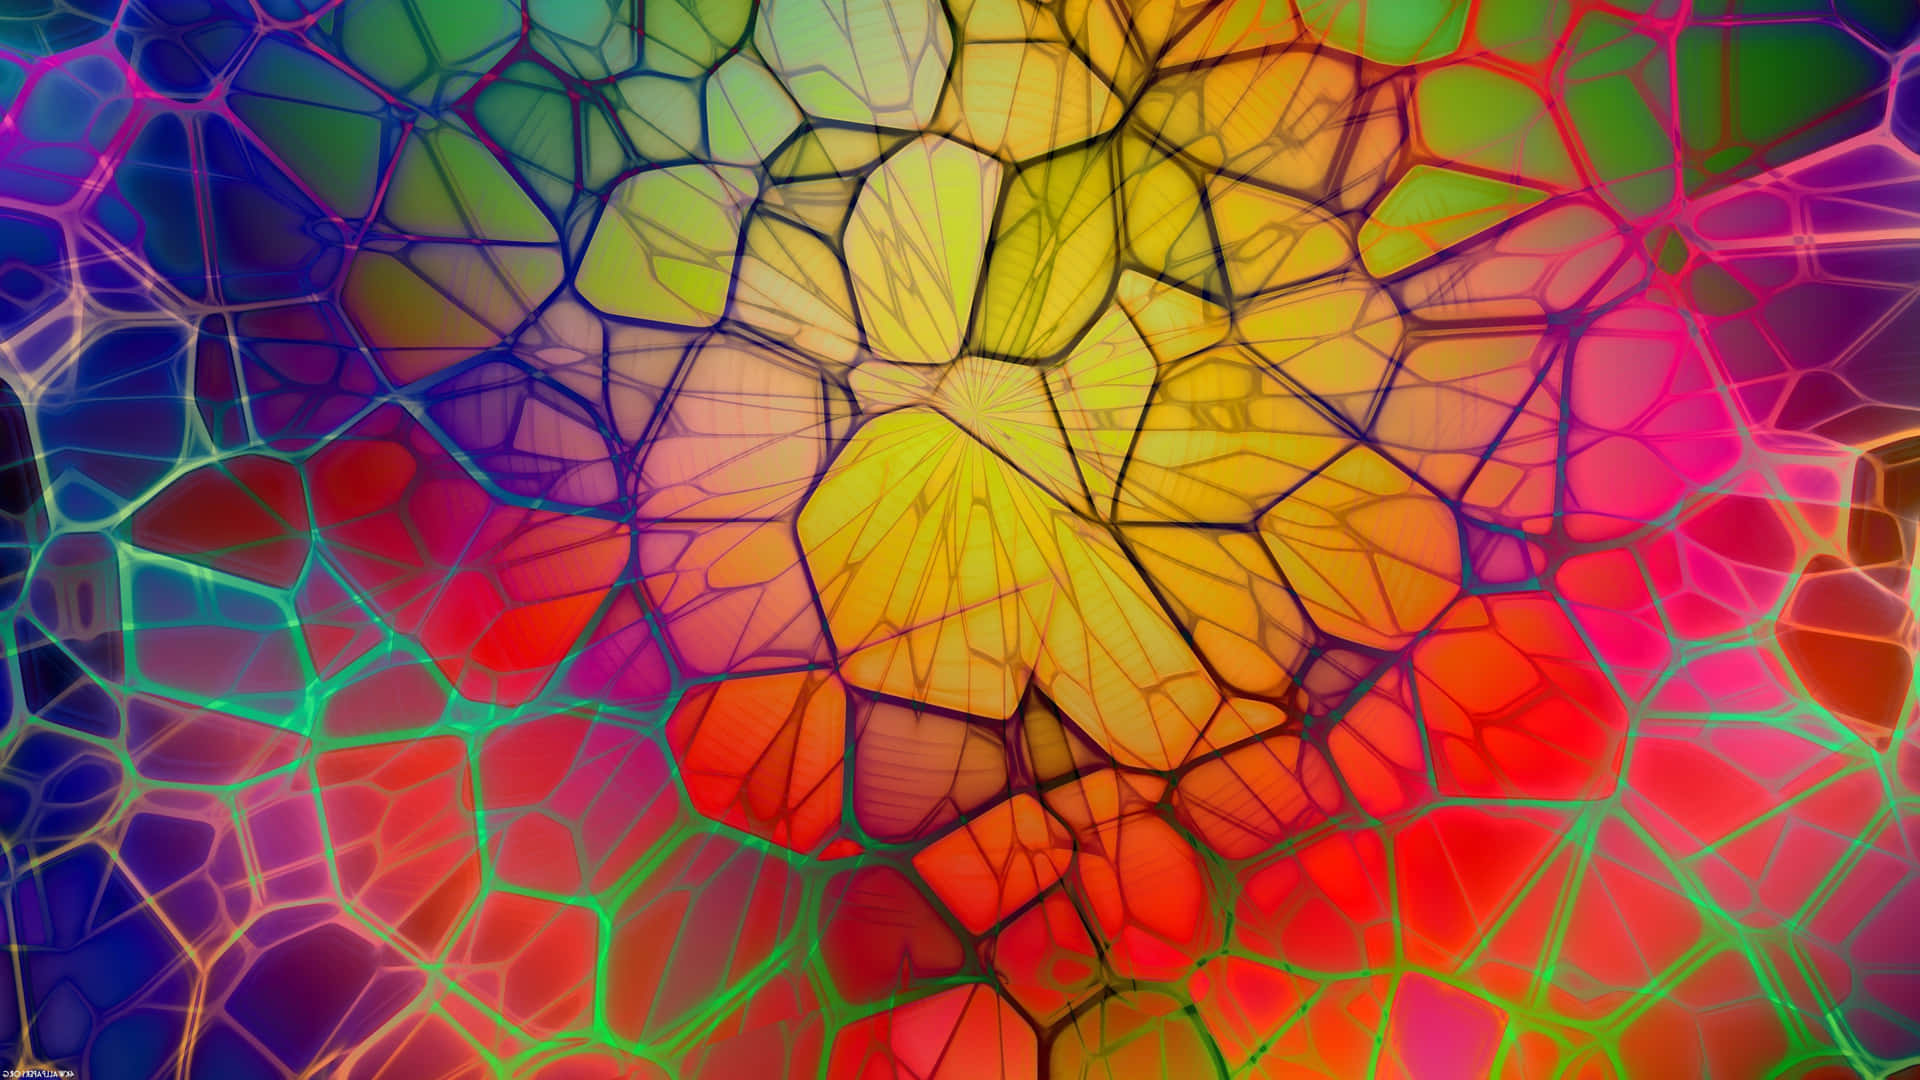 Colorful Abstract Art With Nerve-like Pattern